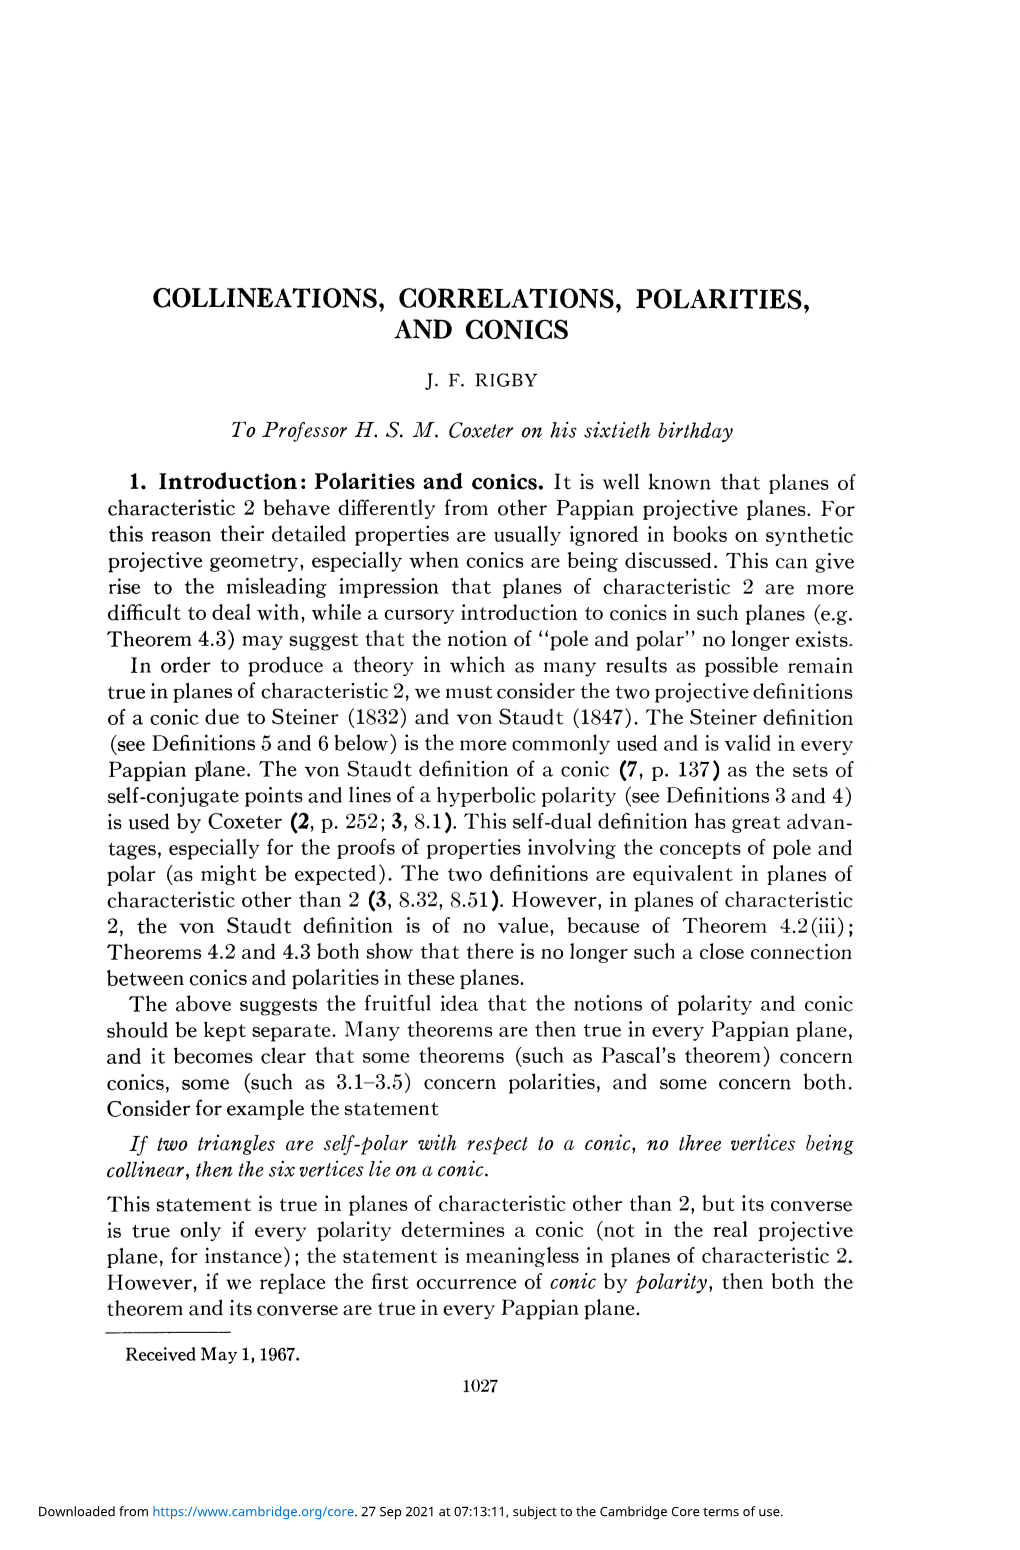 Collineations, Correlations, Polarities, and Conics